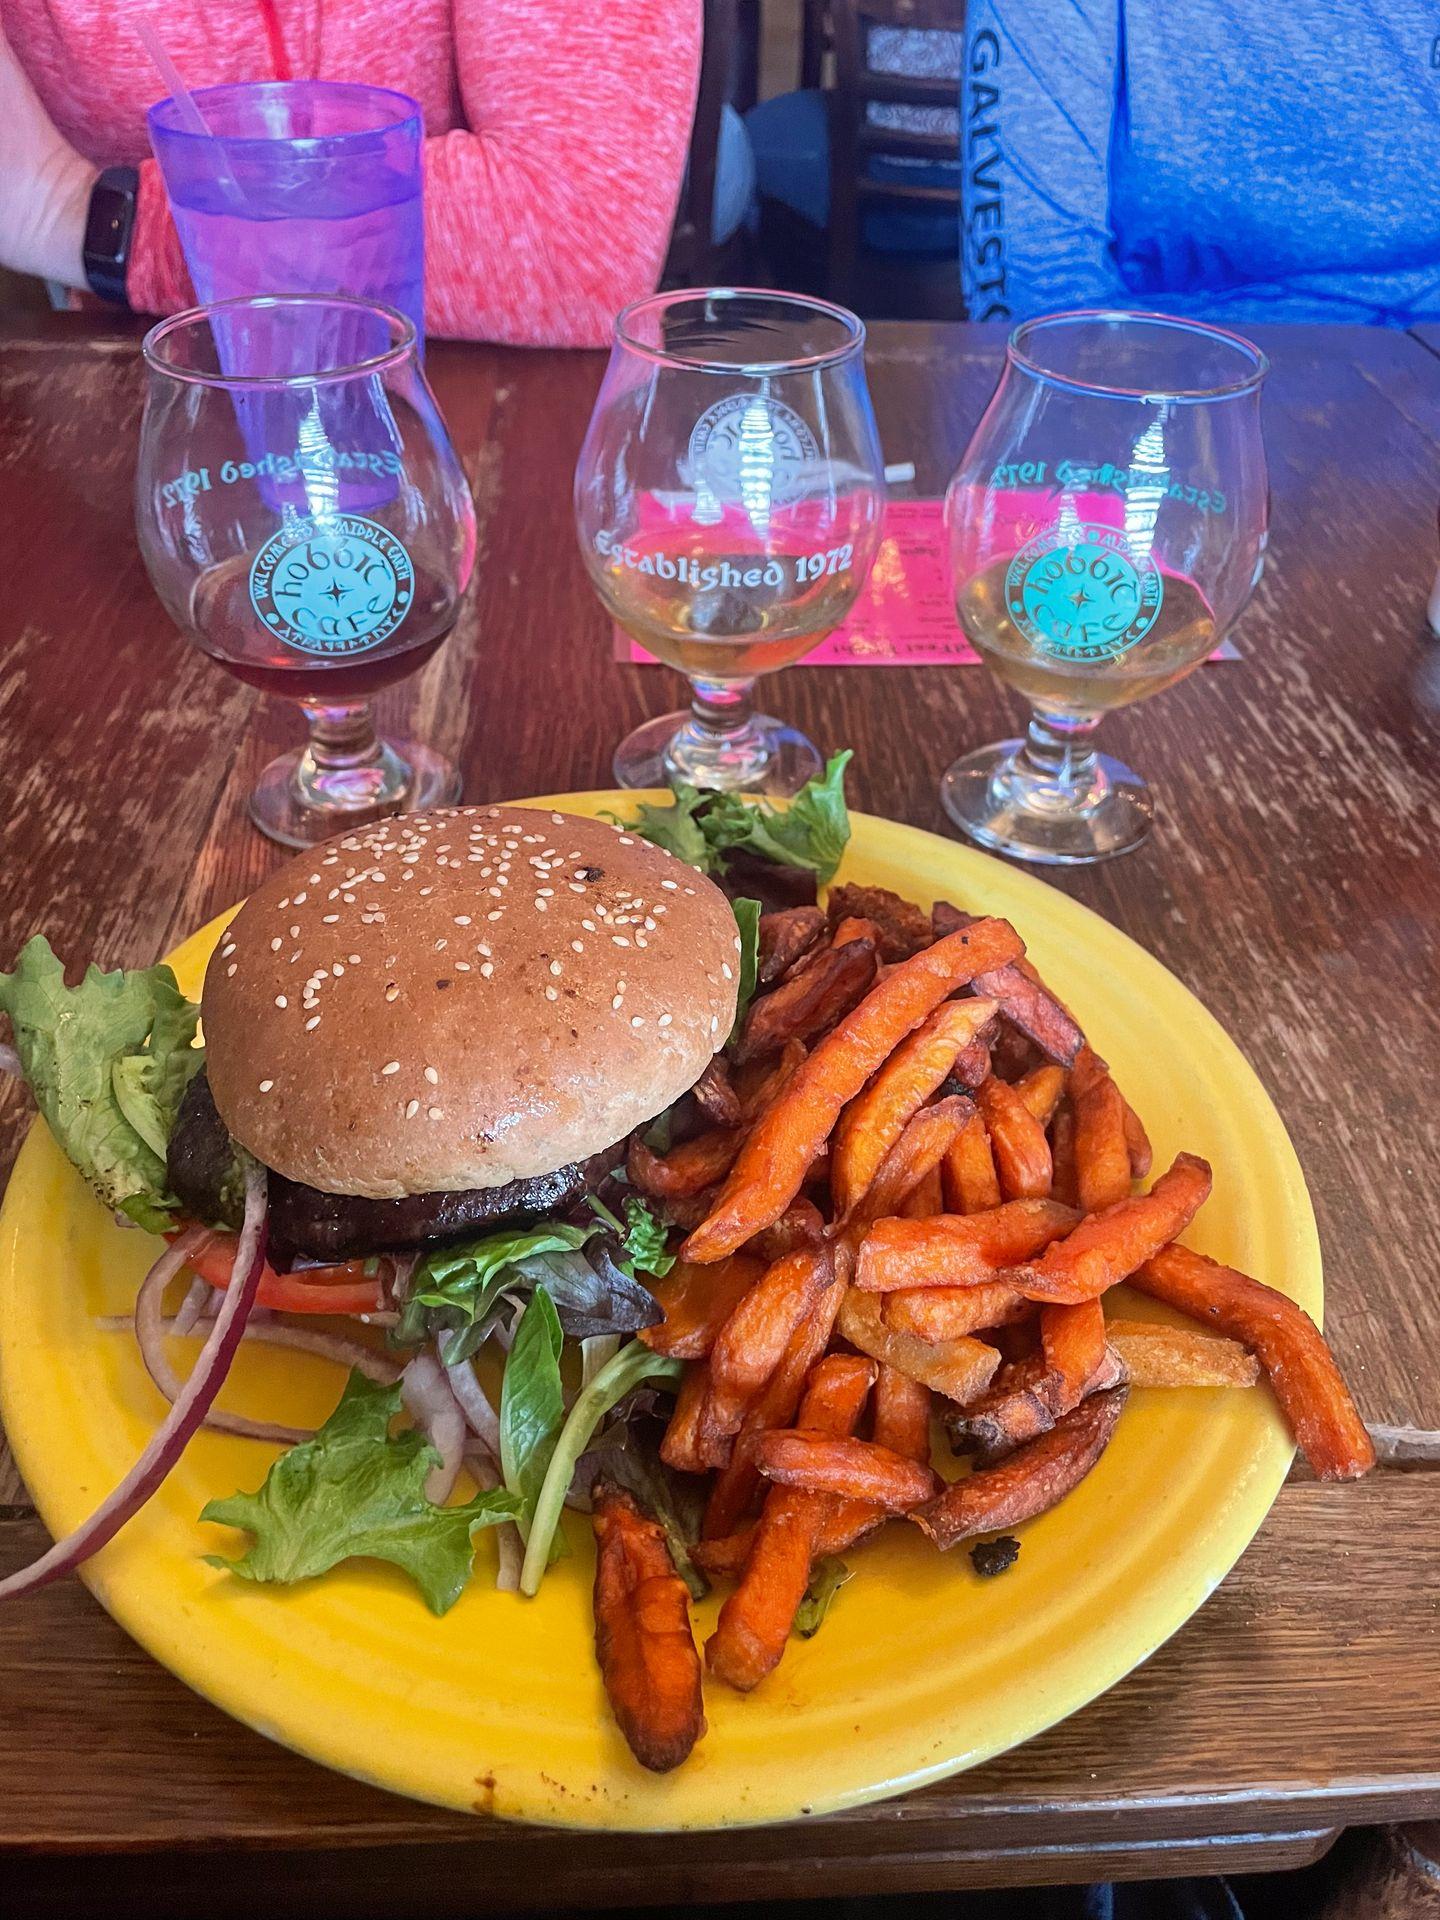 A mushroom burger and sweet potato fries from Hobbit Cafe